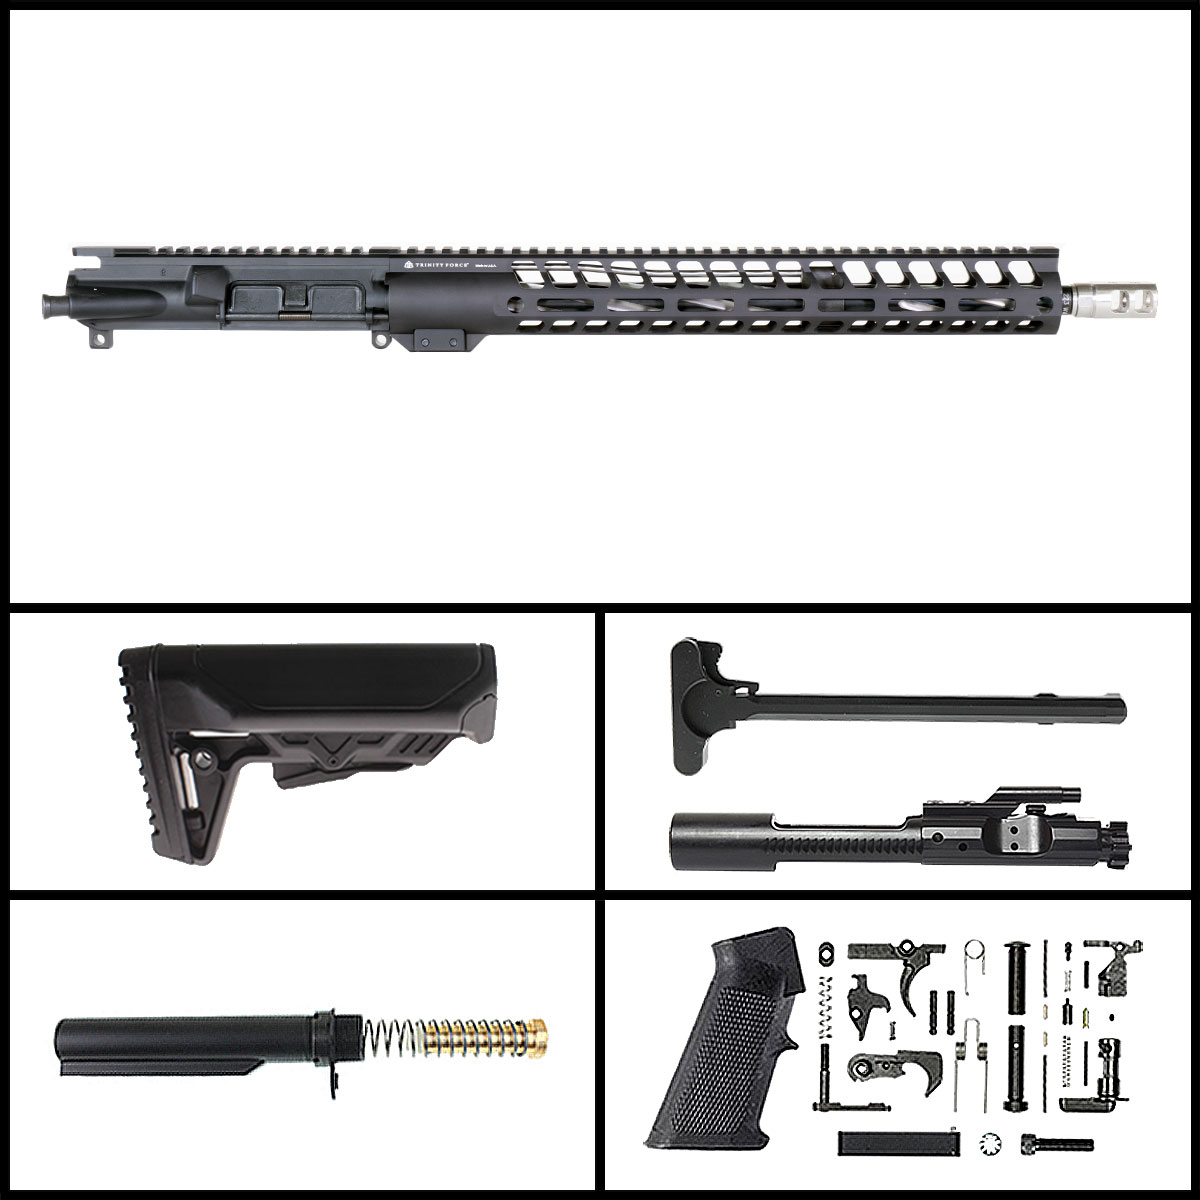 Davidson Defense 'Honorable Fisticuffs' 16-inch AR-15 .223 Wylde Nitride Rifle Full Build Kit